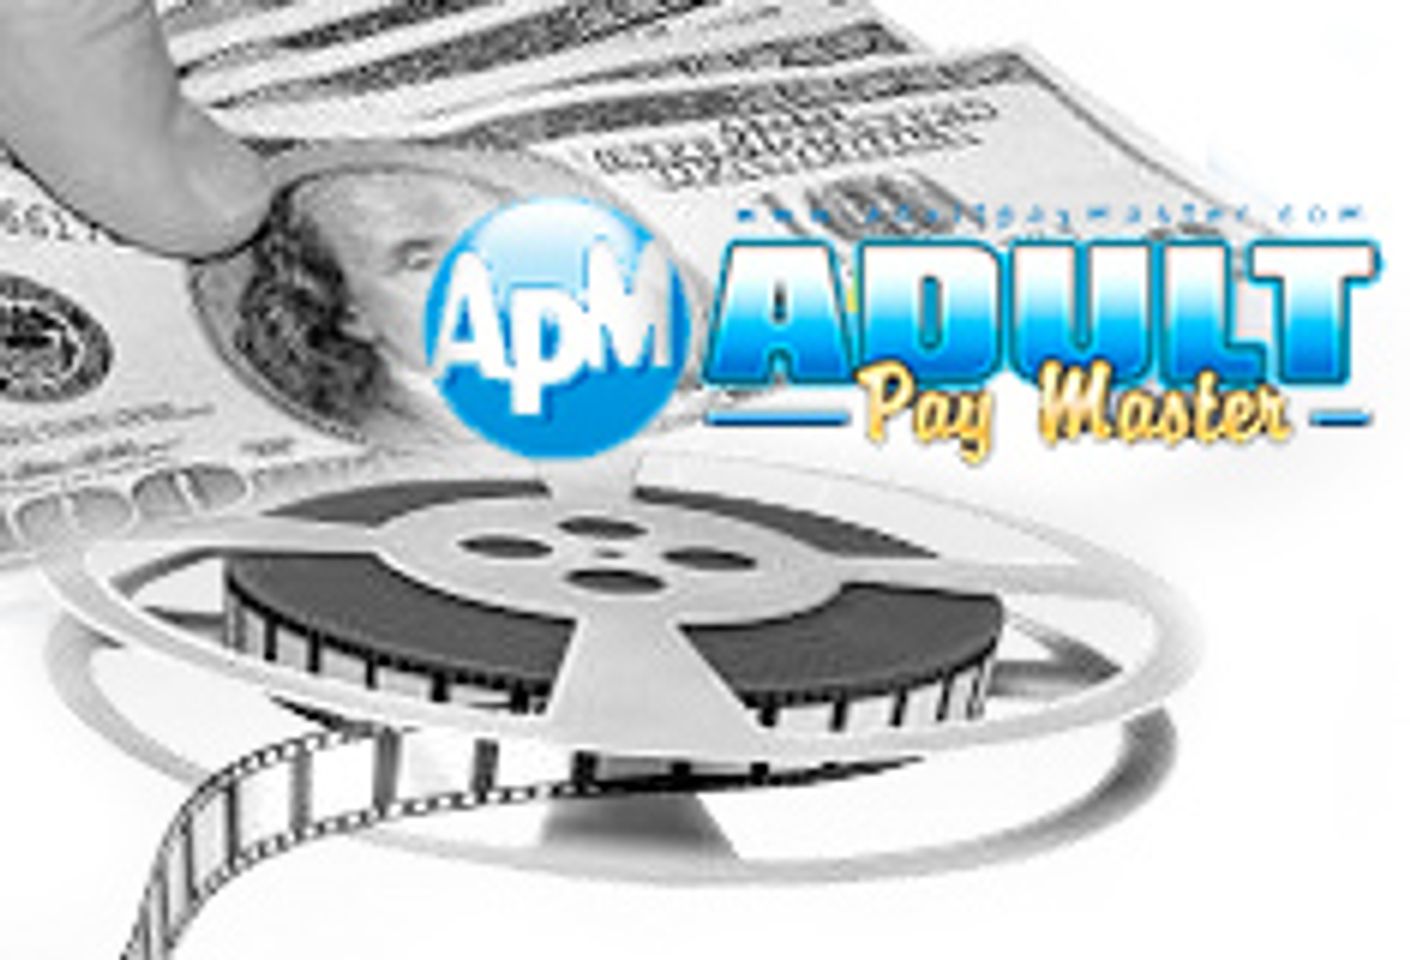 Adult Paymaster Adds All Site Access Program